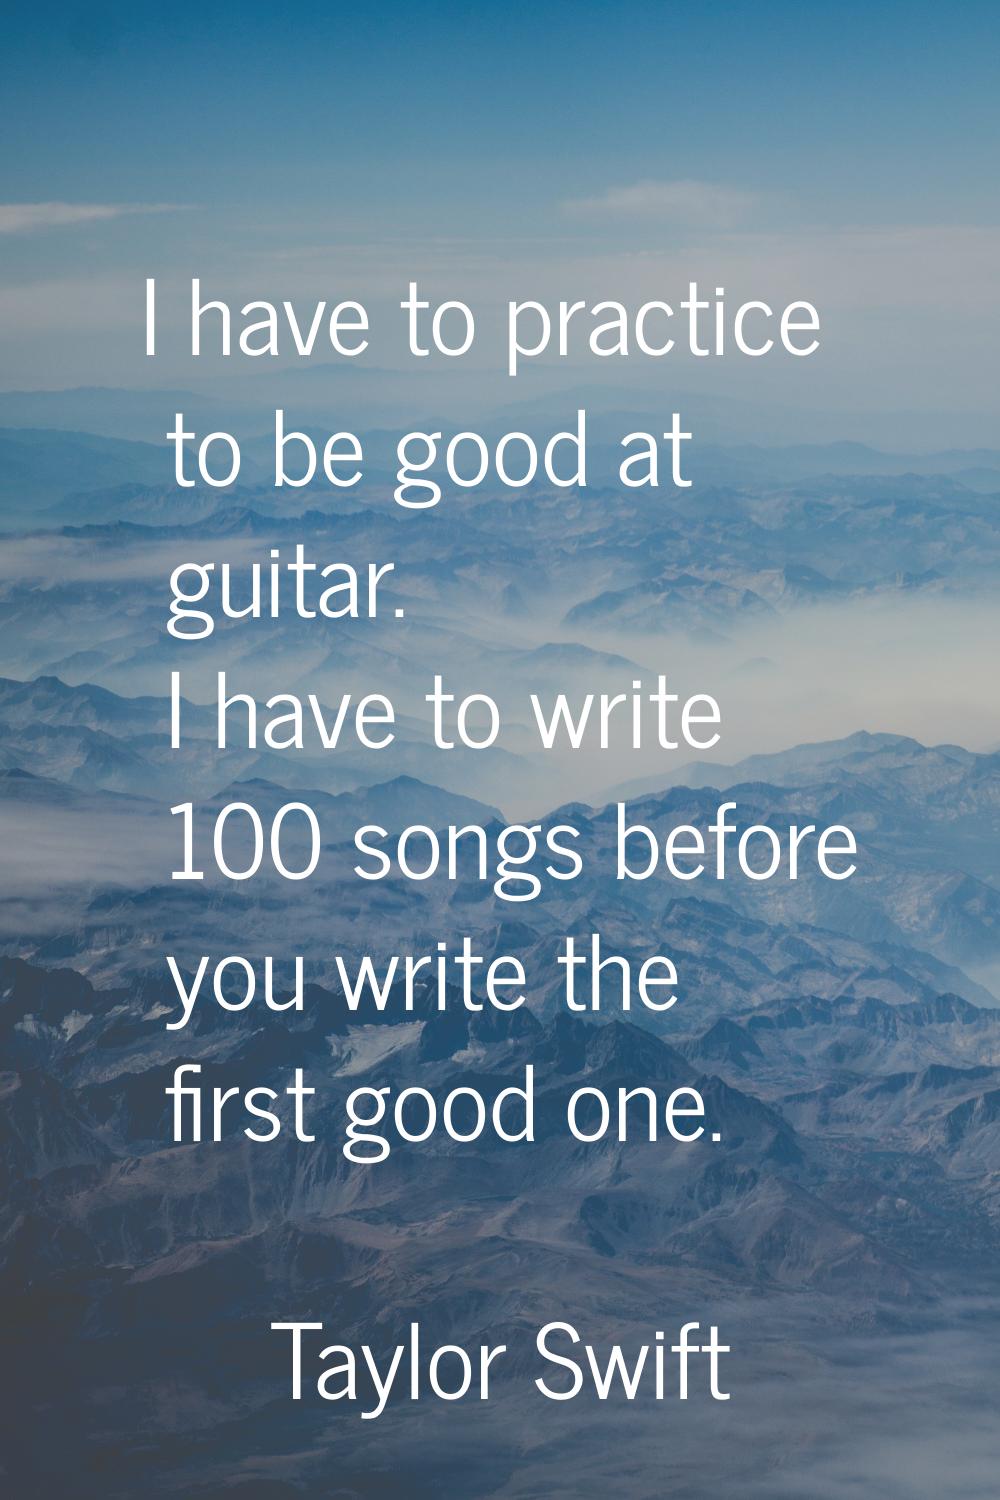 I have to practice to be good at guitar. I have to write 100 songs before you write the first good 